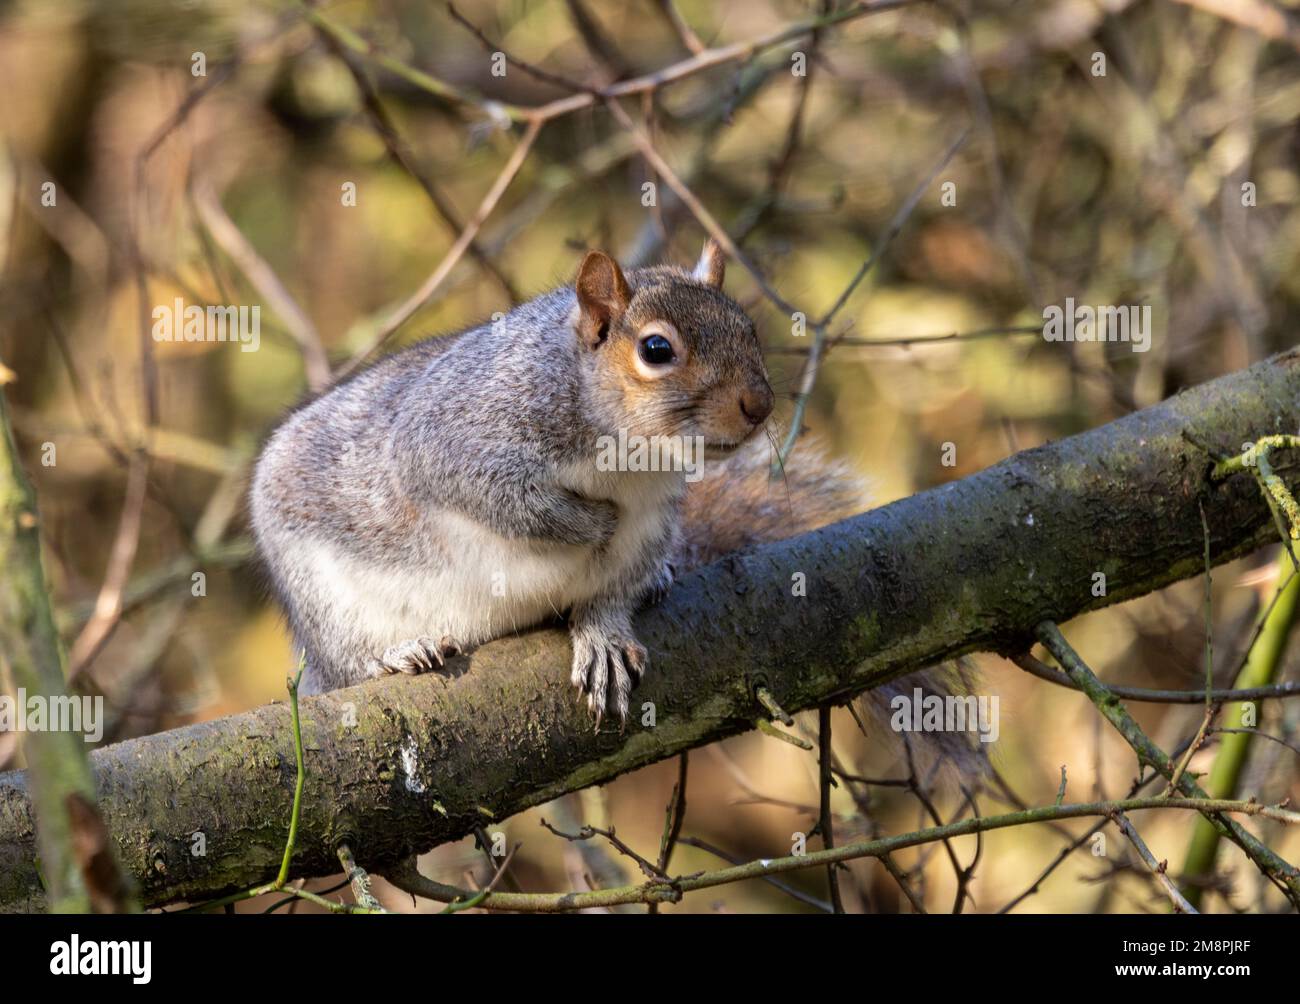 The Grey Squirrel was introduced to the UK over a century ago. They have now replaced the indigenous Red Squirrel, Stock Photo